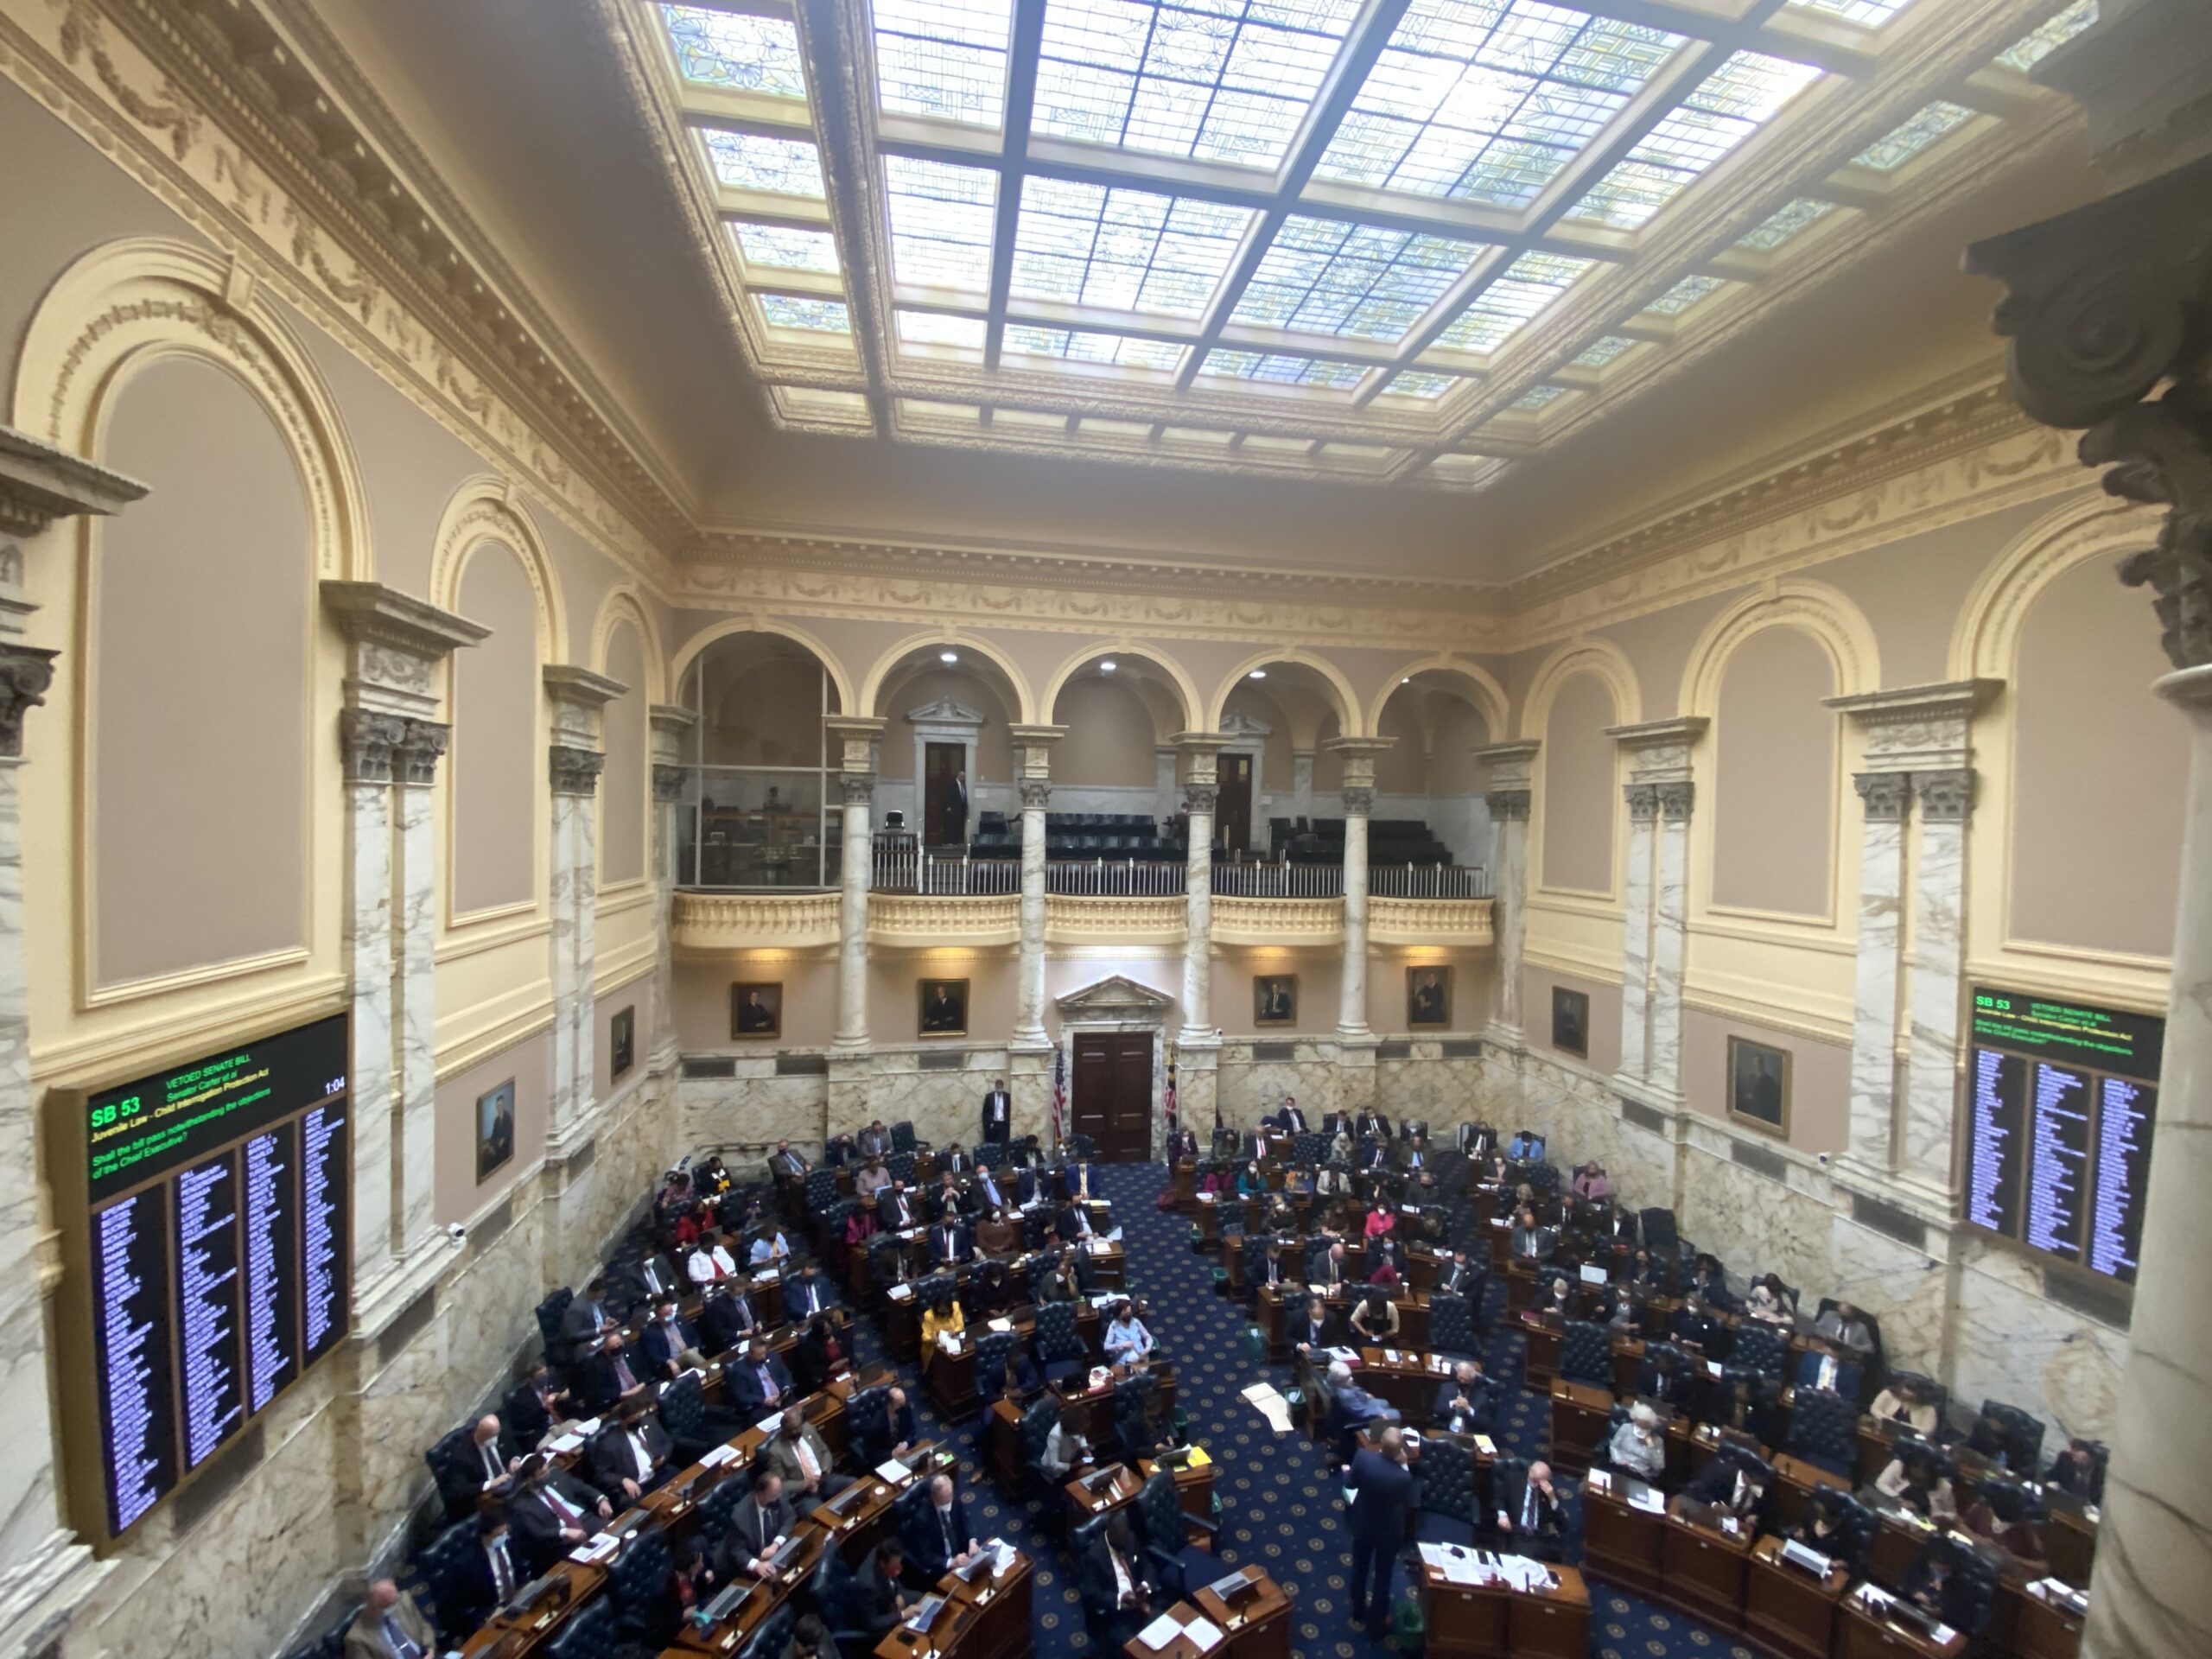 A view of the Maryland House of Delegates chamber from the gallery.